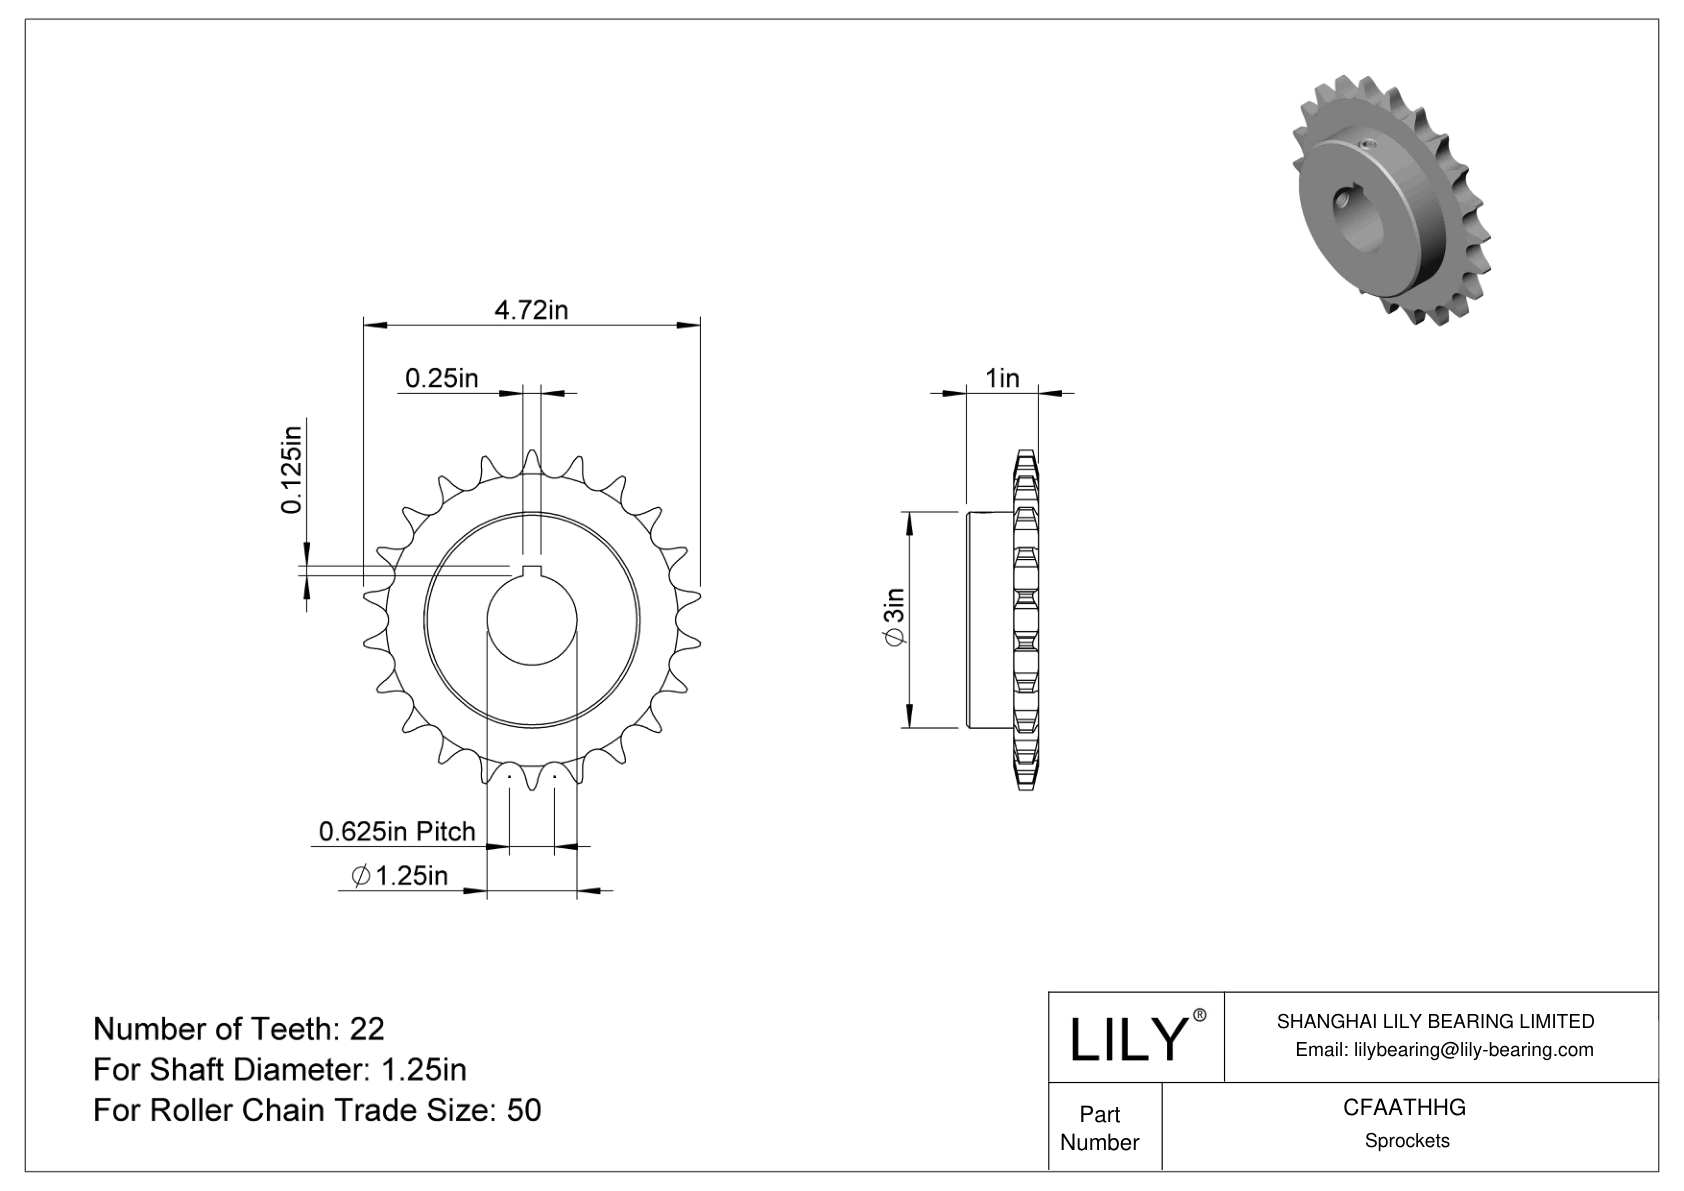 CFAATHHG Wear-Resistant Sprockets for ANSI Roller Chain cad drawing